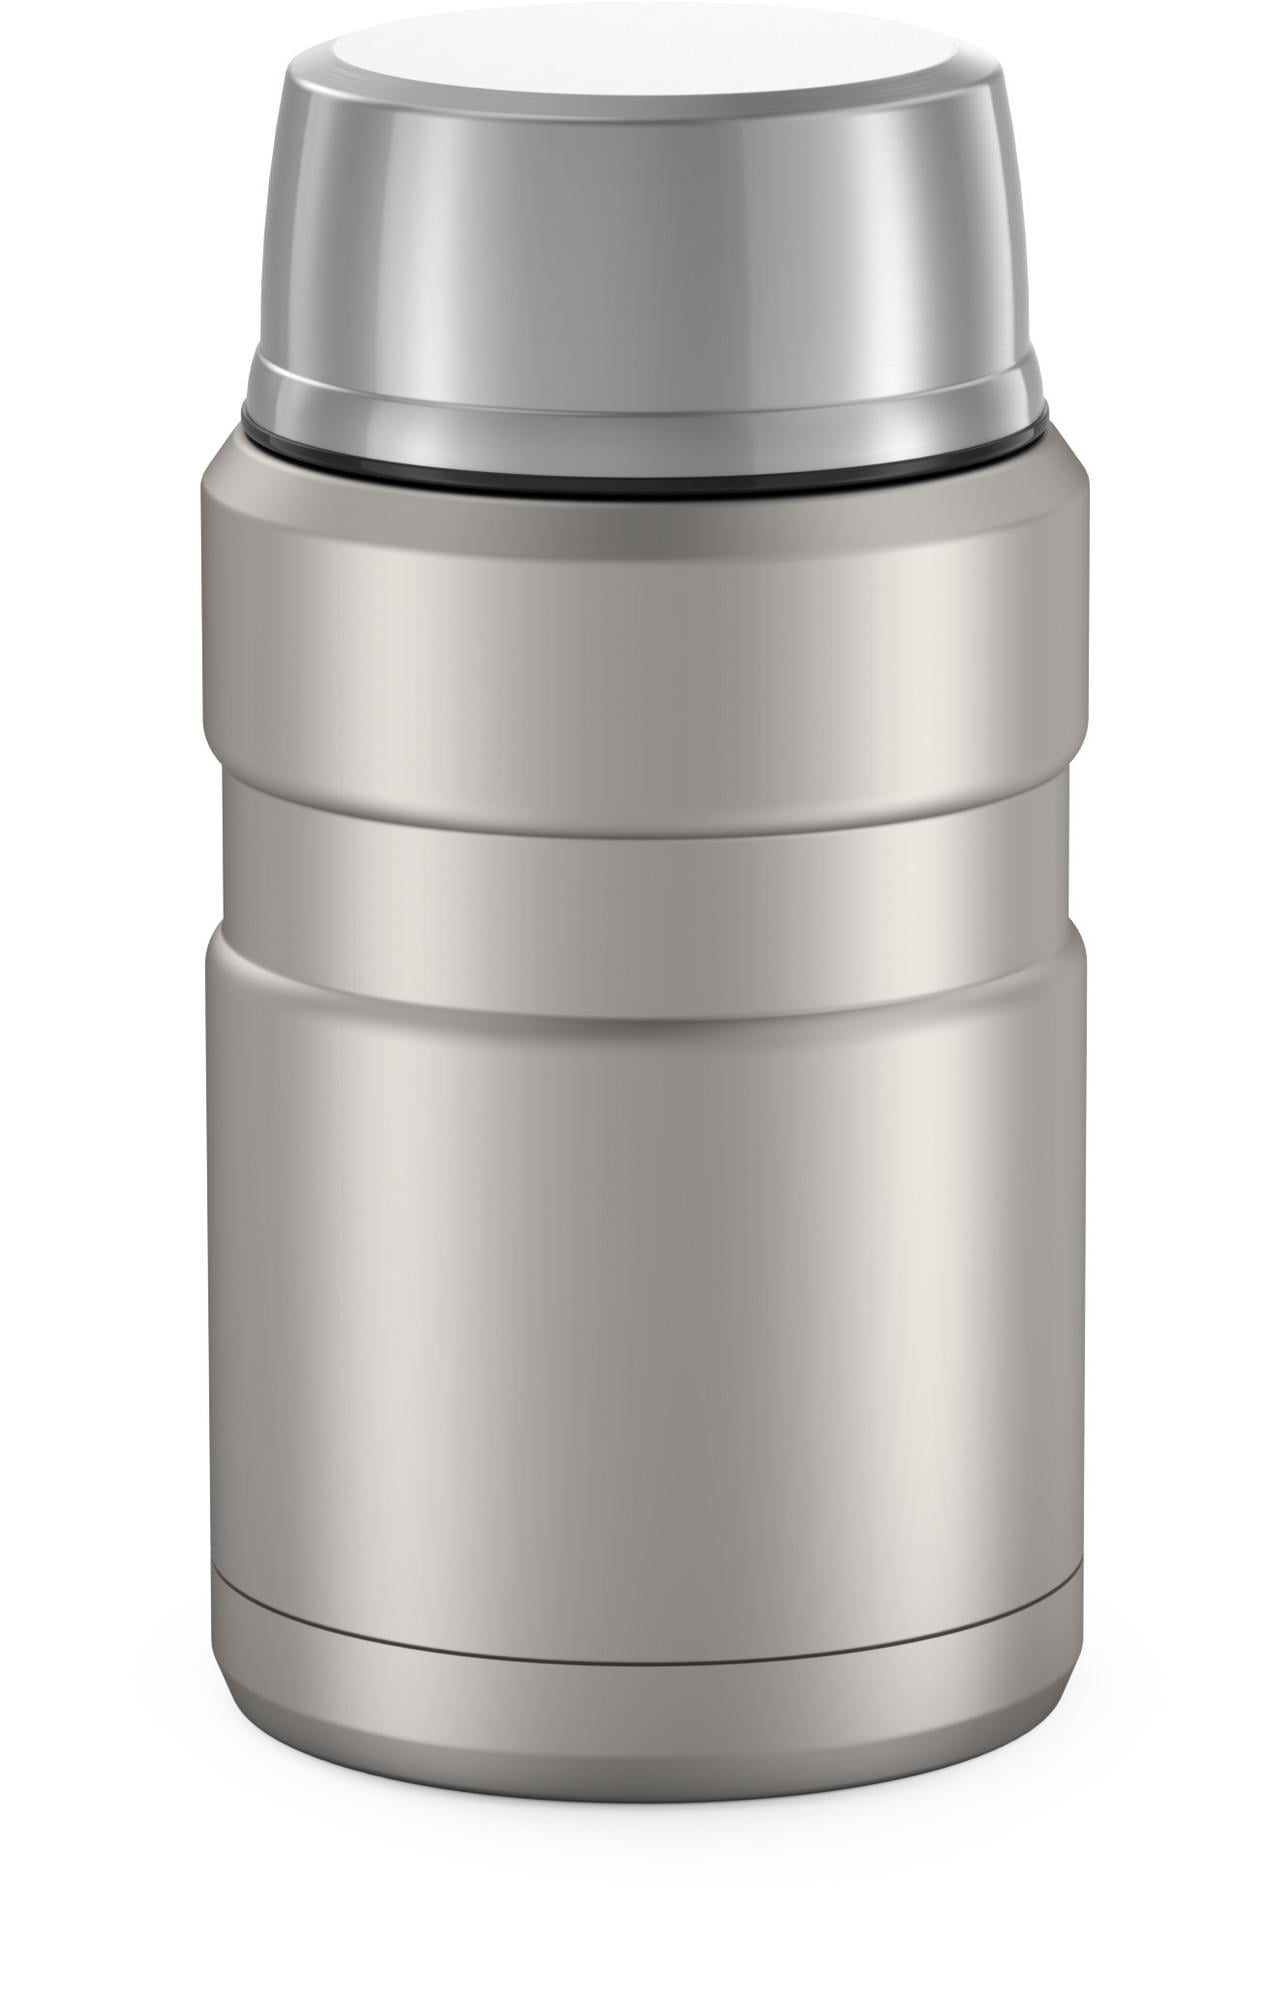 Thermos Stainless King 24 Oz. Food Jar in Stainless Steel and Midnight Blue